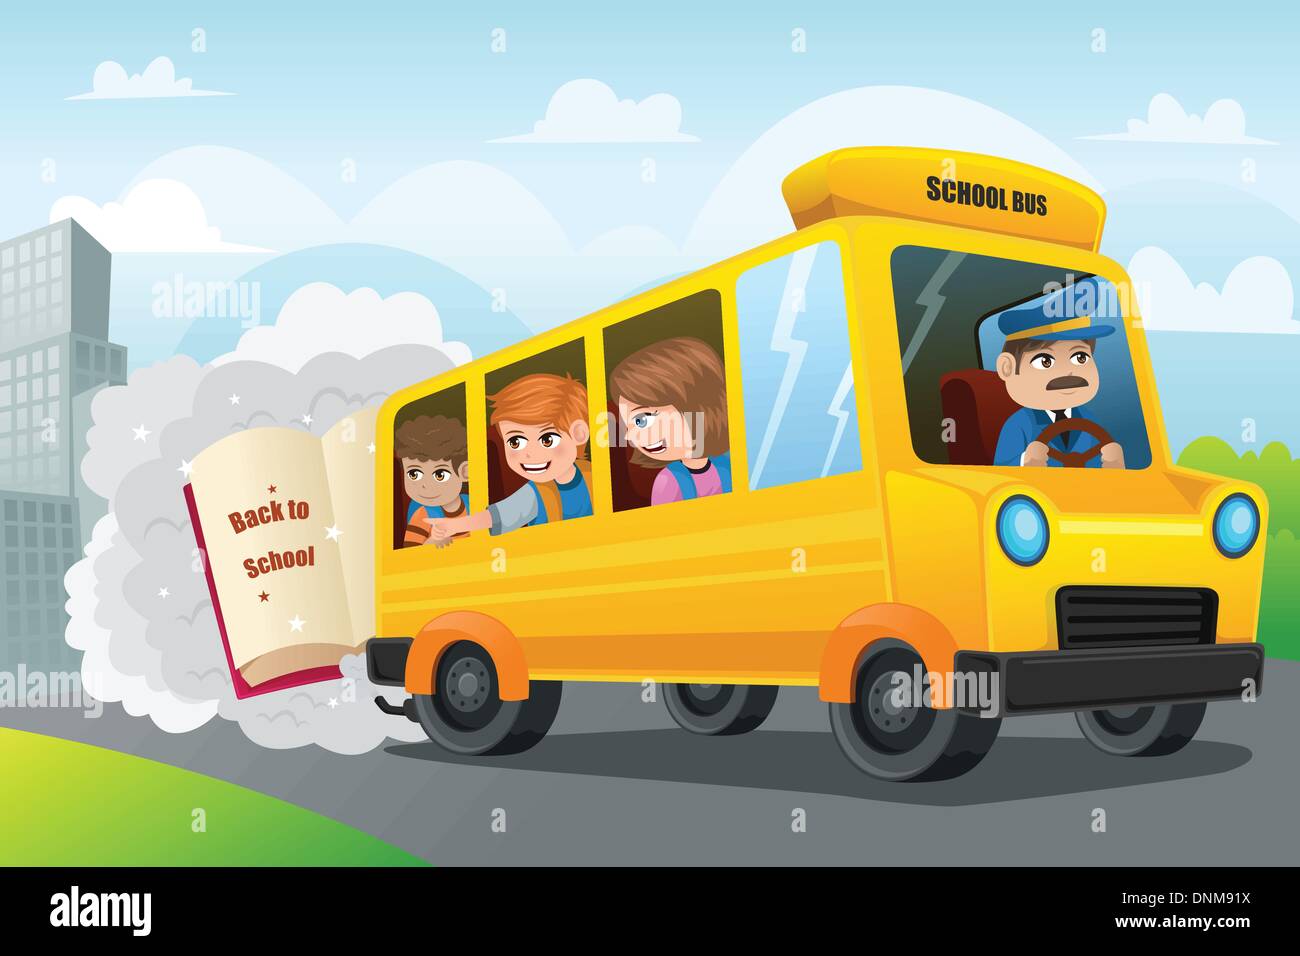 A vector illustration of kids riding school bus back to school Stock Vector